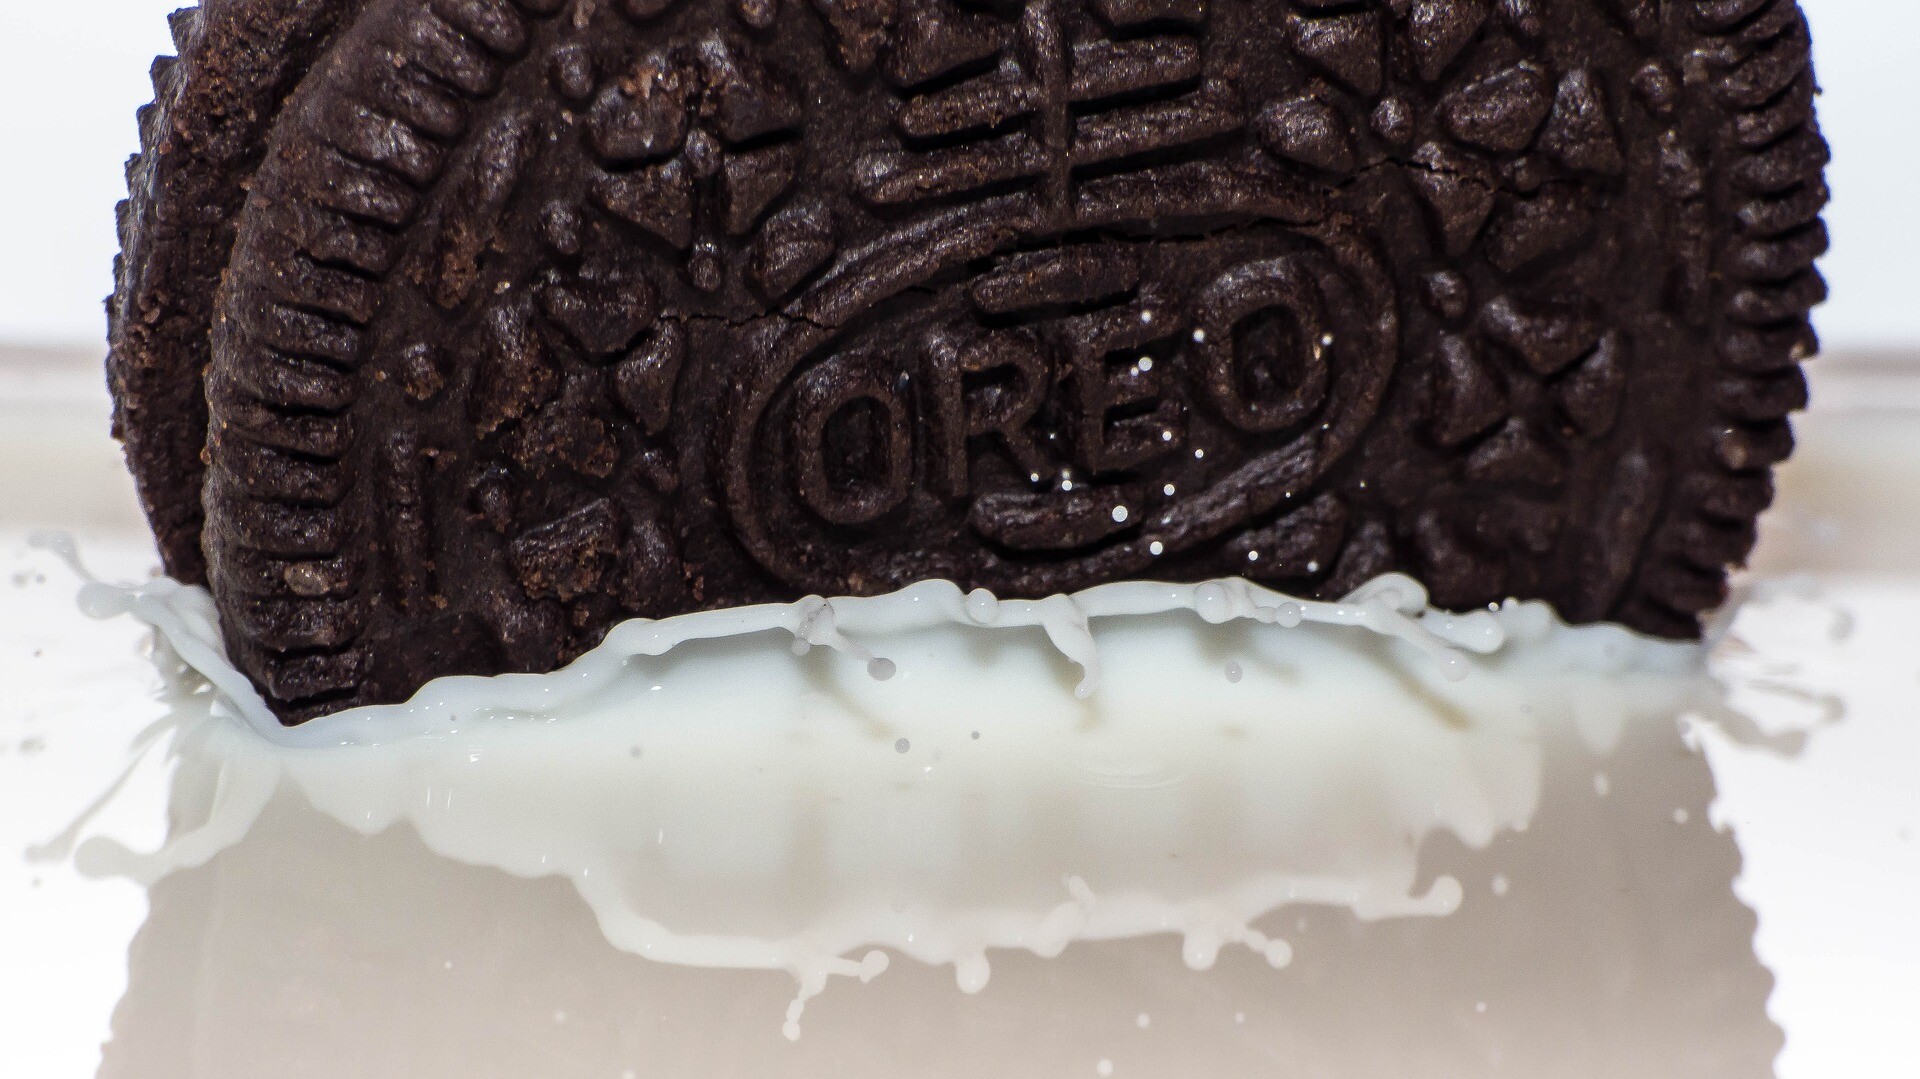 Oreo and Game of Thrones